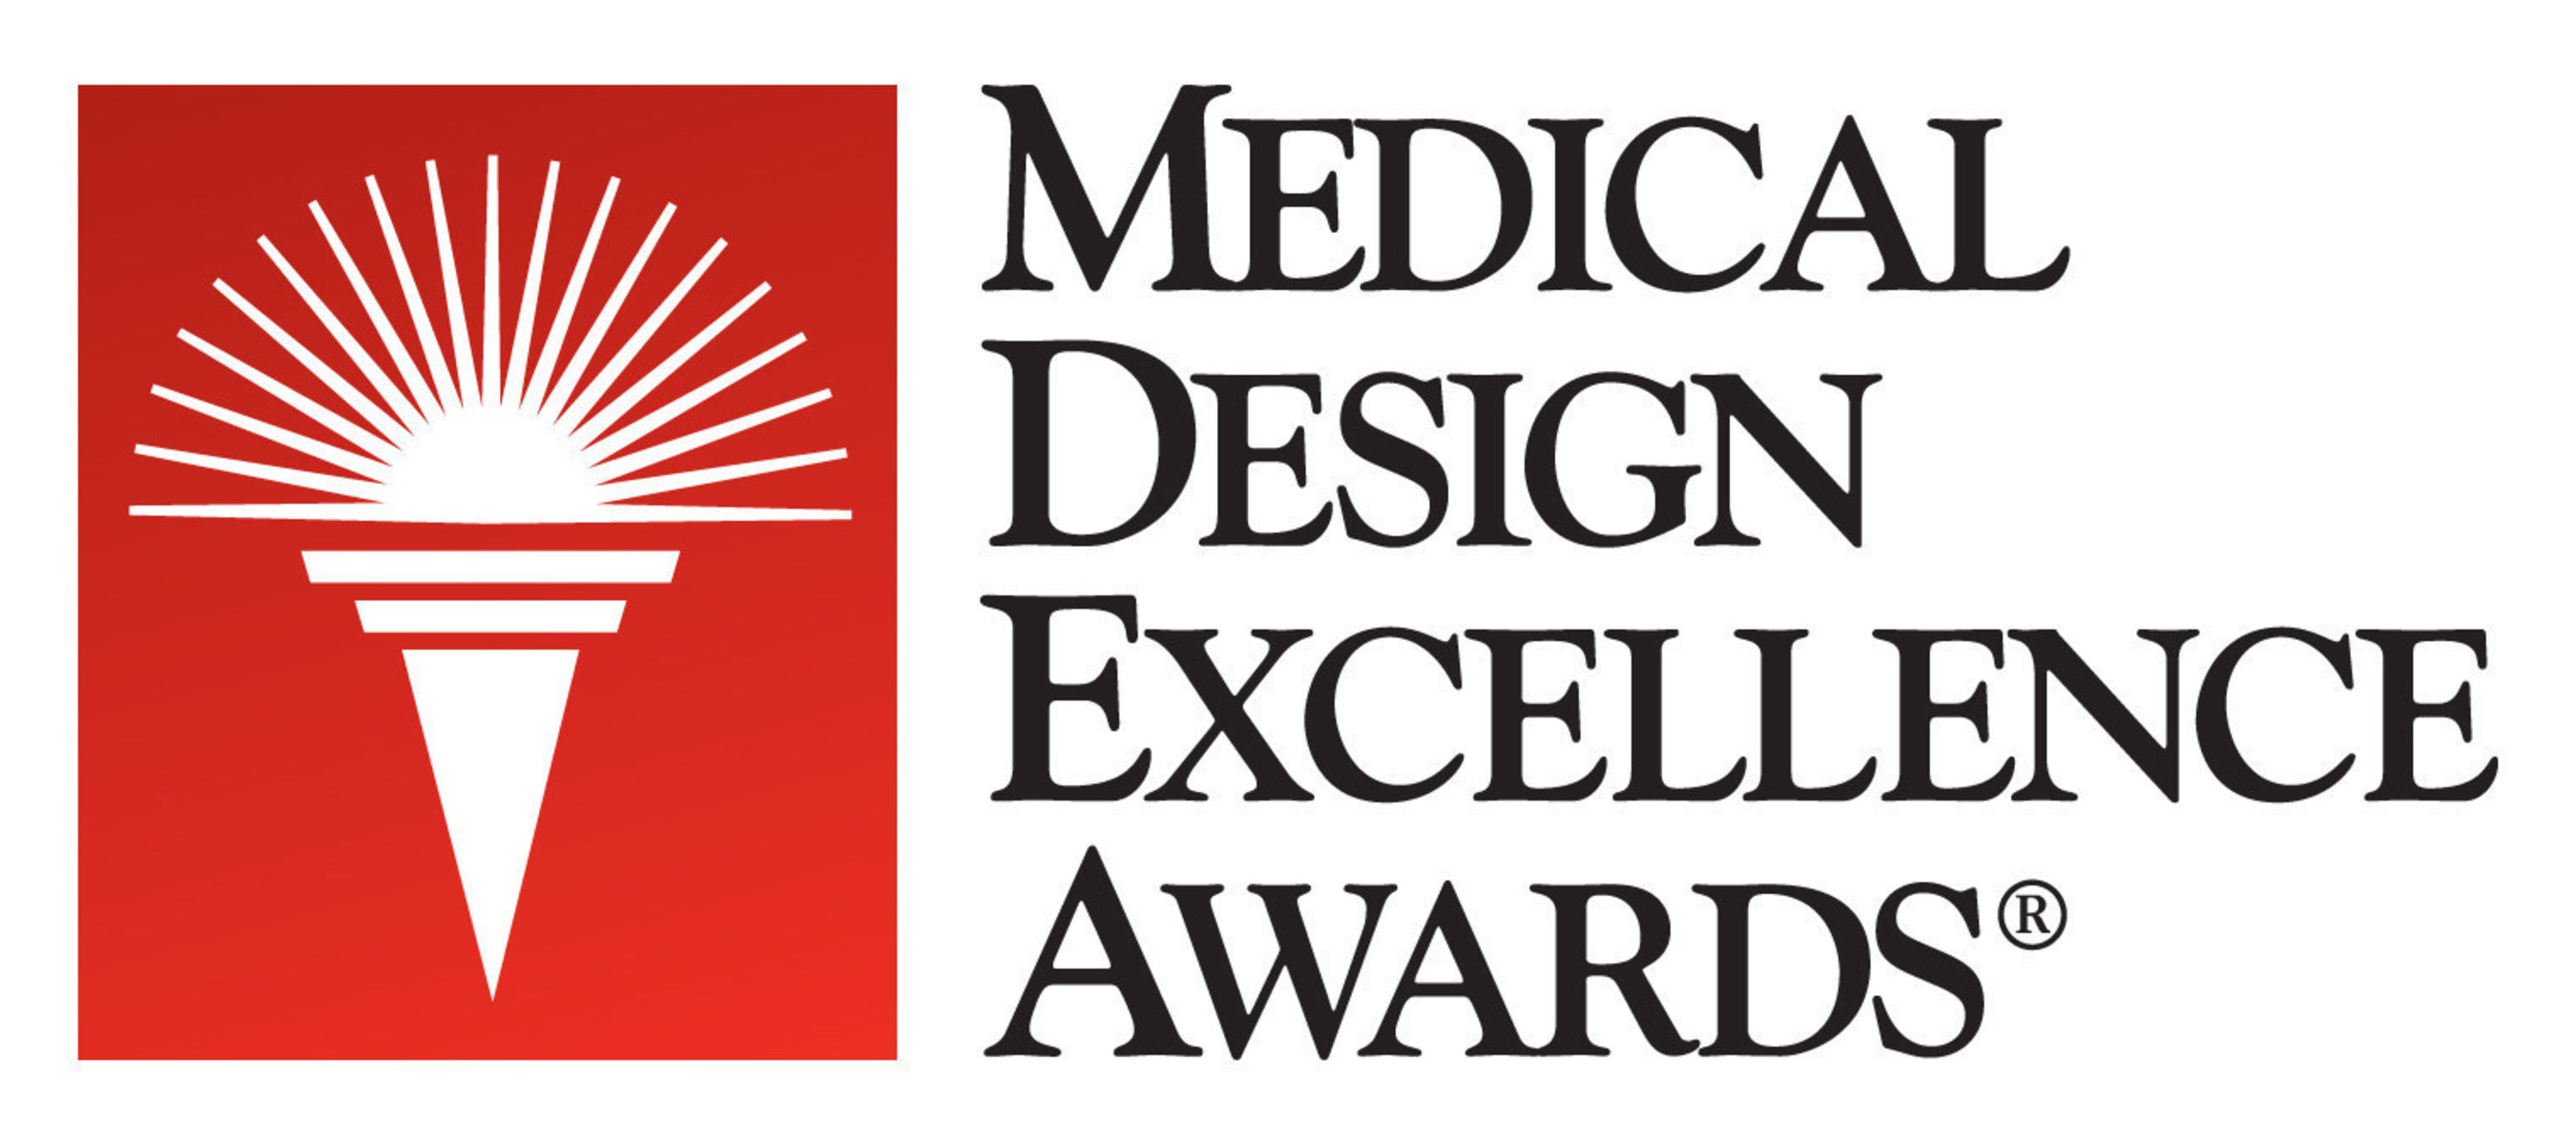 Top medtech products honored at the 2015 Medical Design Excellence Awards